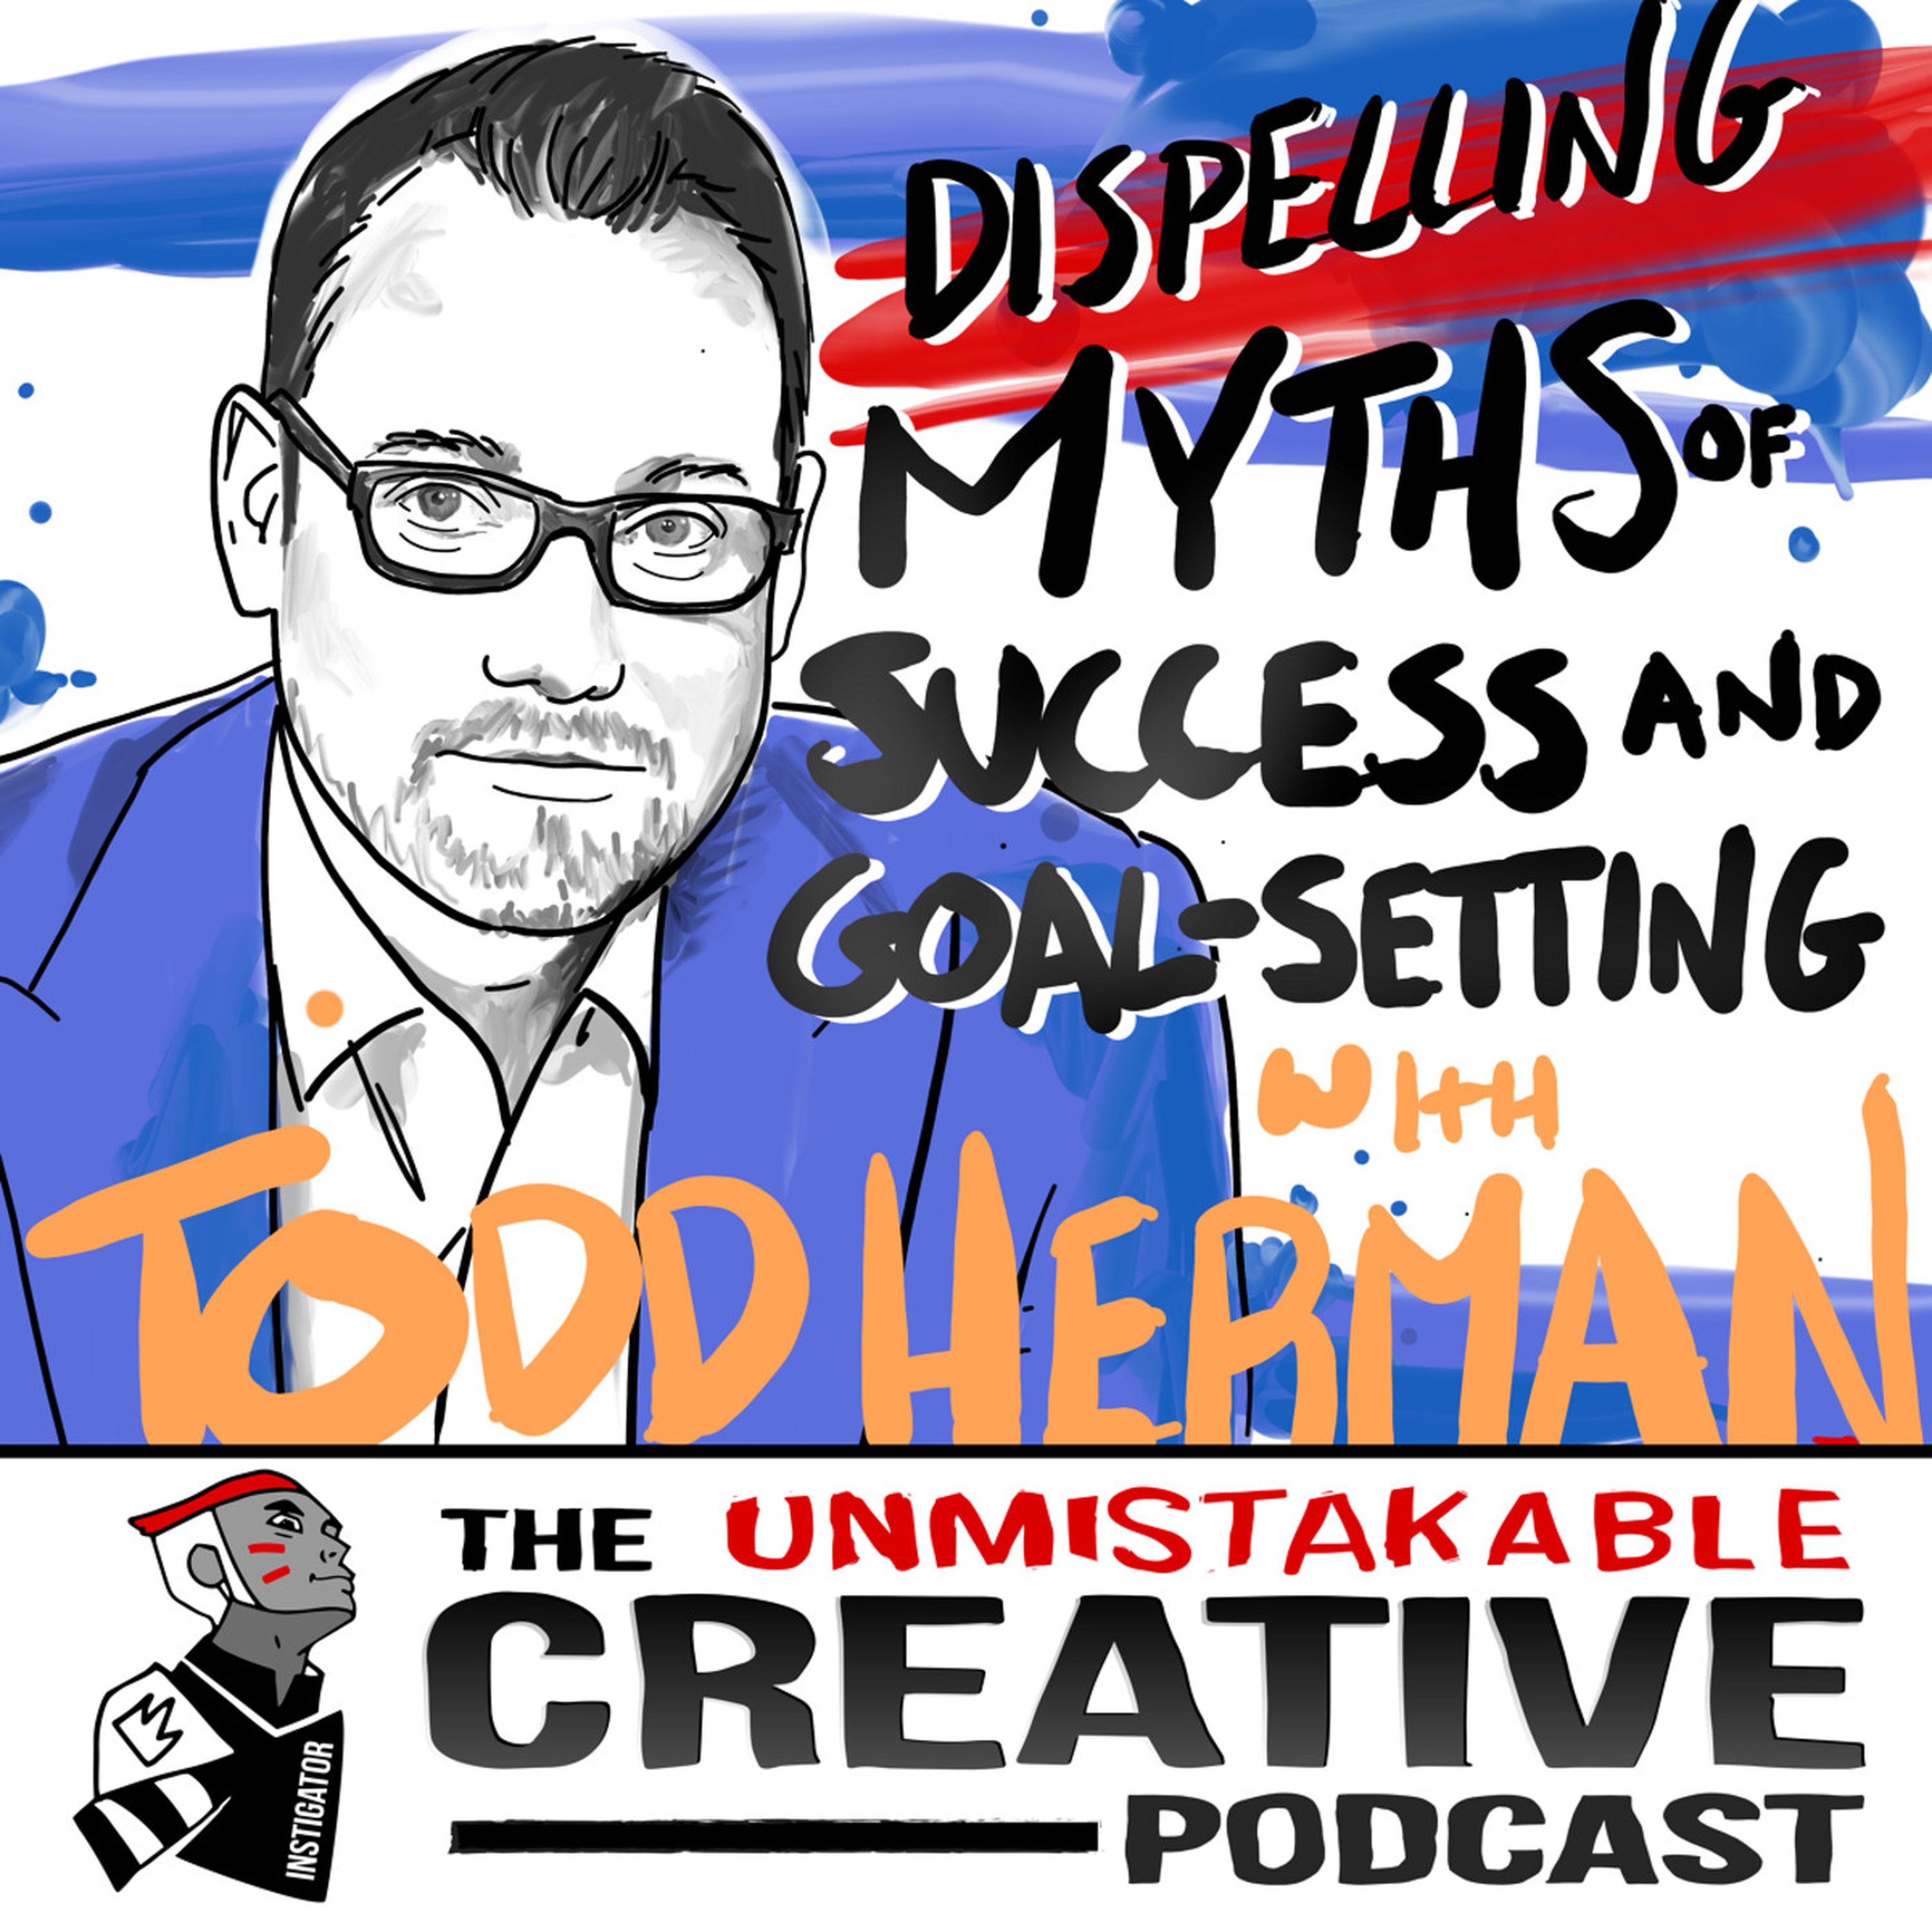 Dispelling Myths of Success and Goal Setting With Todd Herman Image